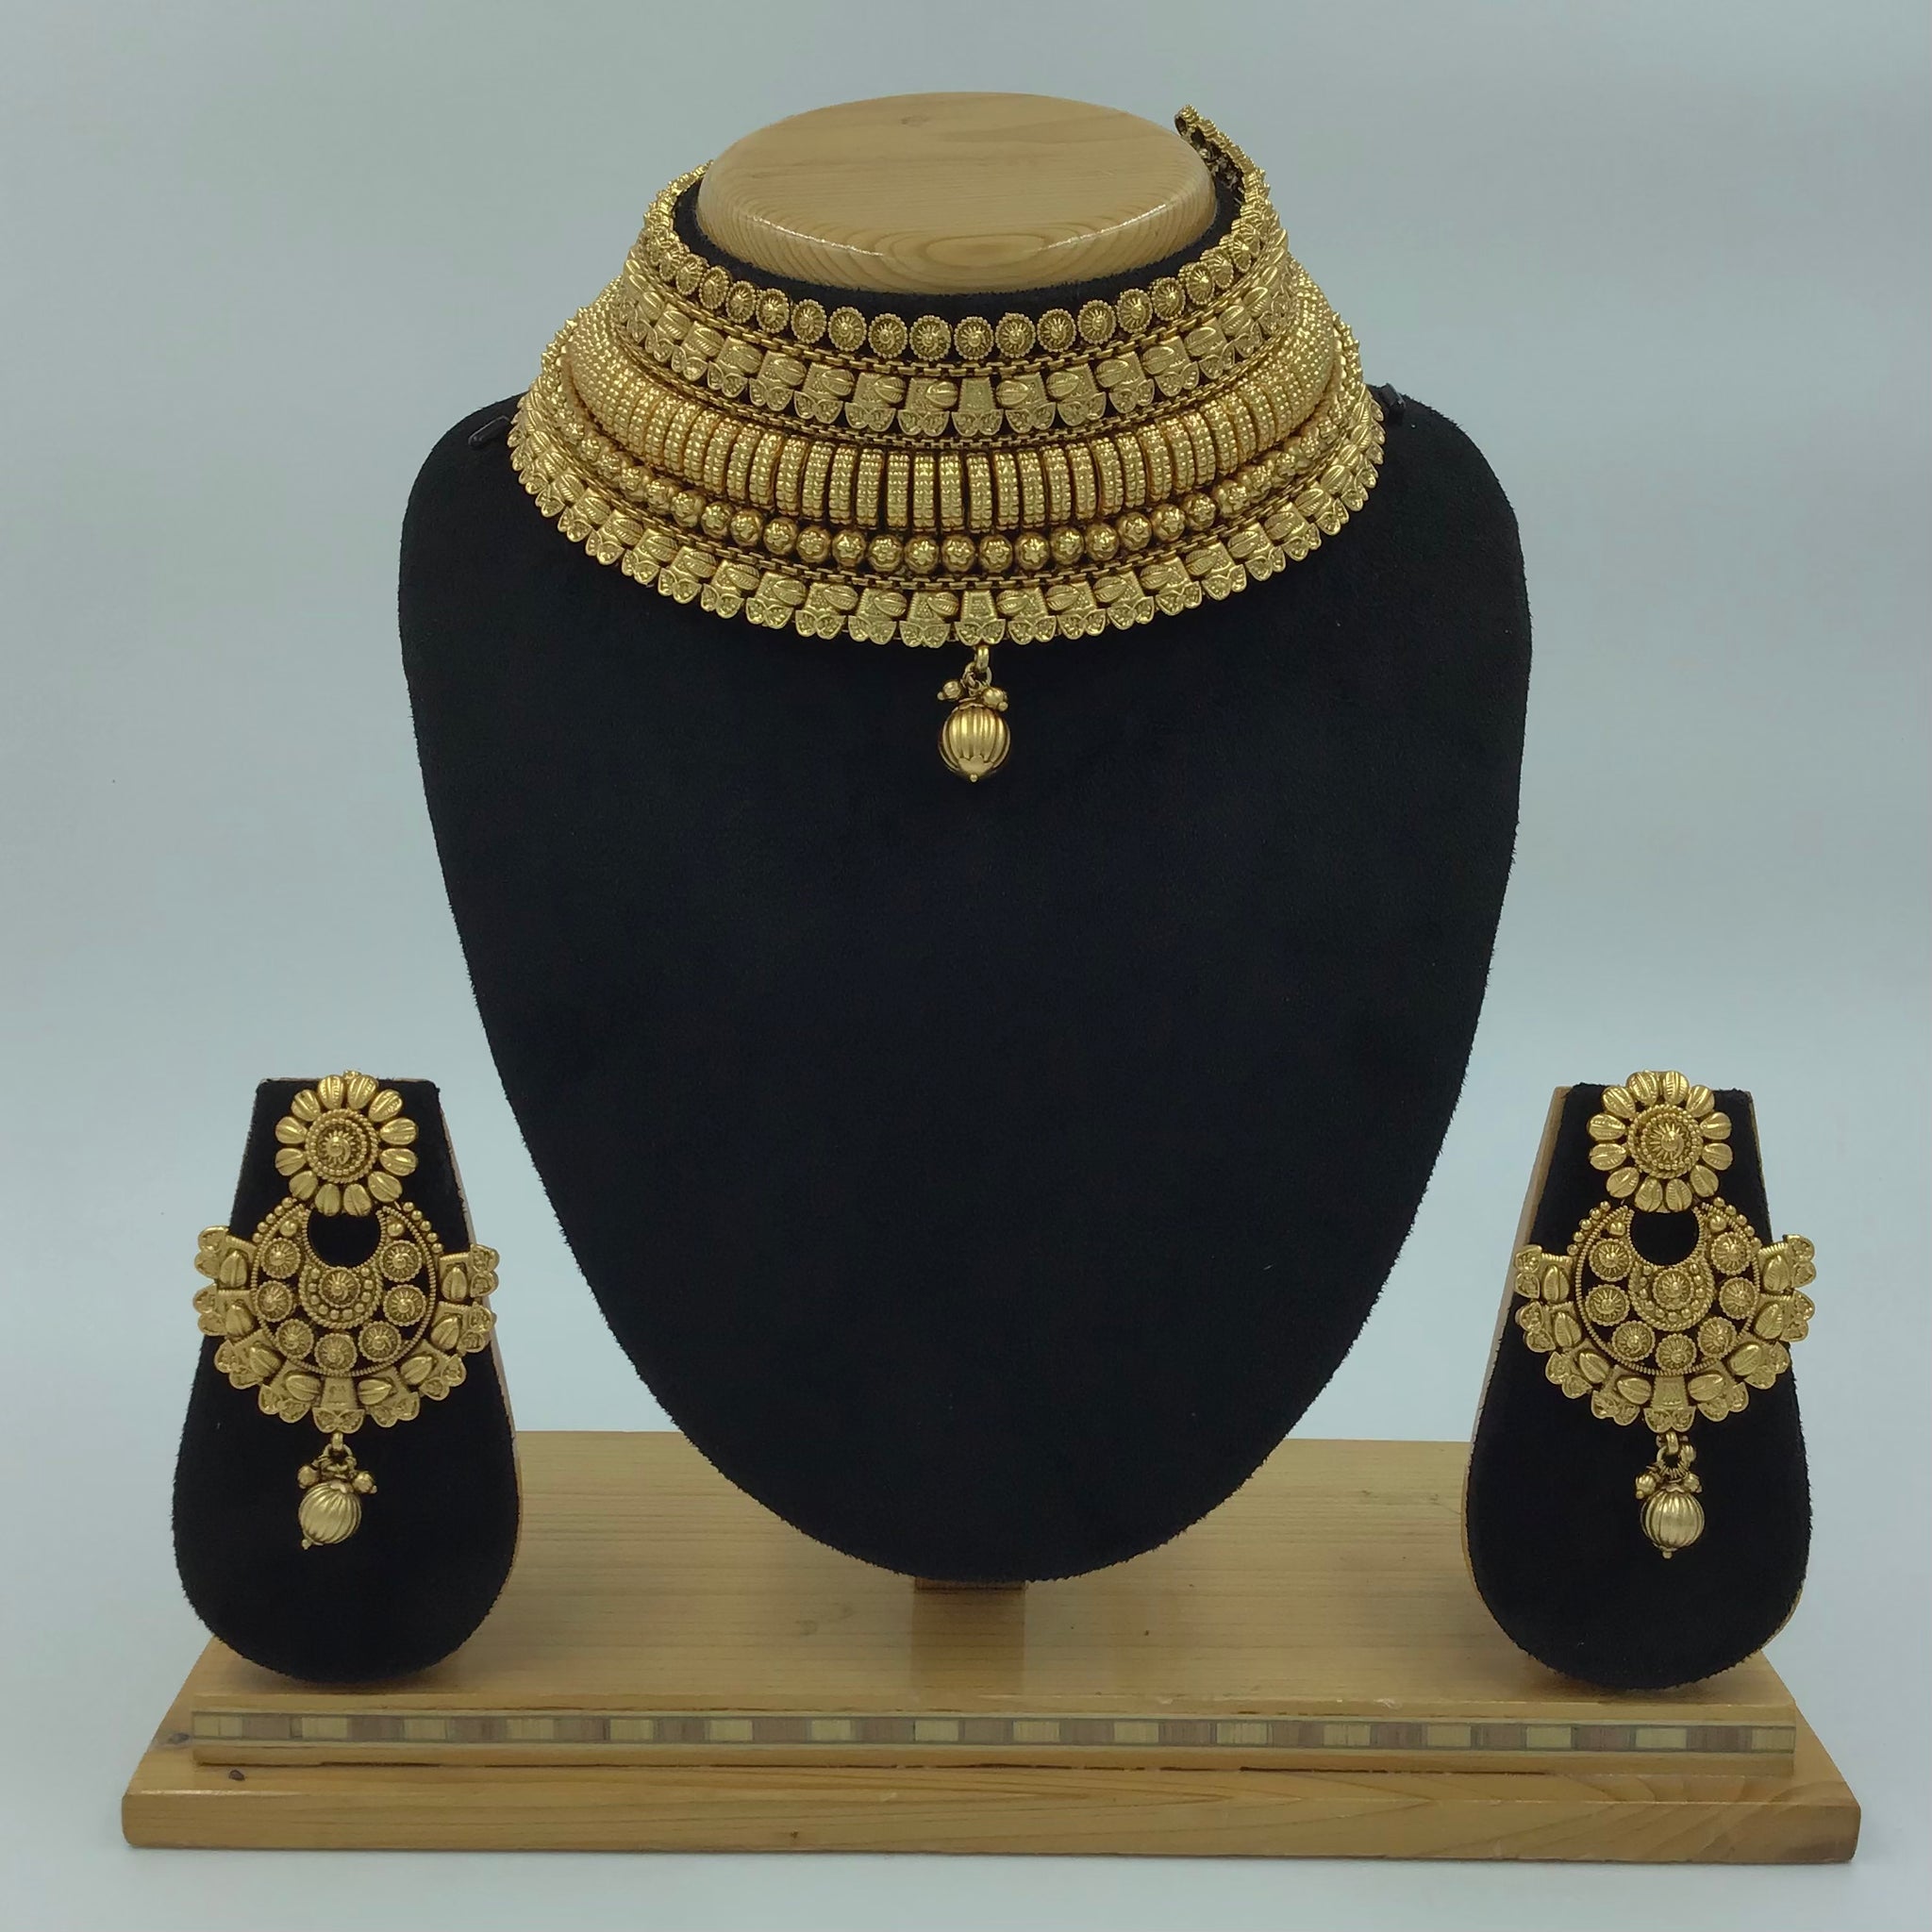 Antique Gold Plated Choker Necklace Set 10003-28